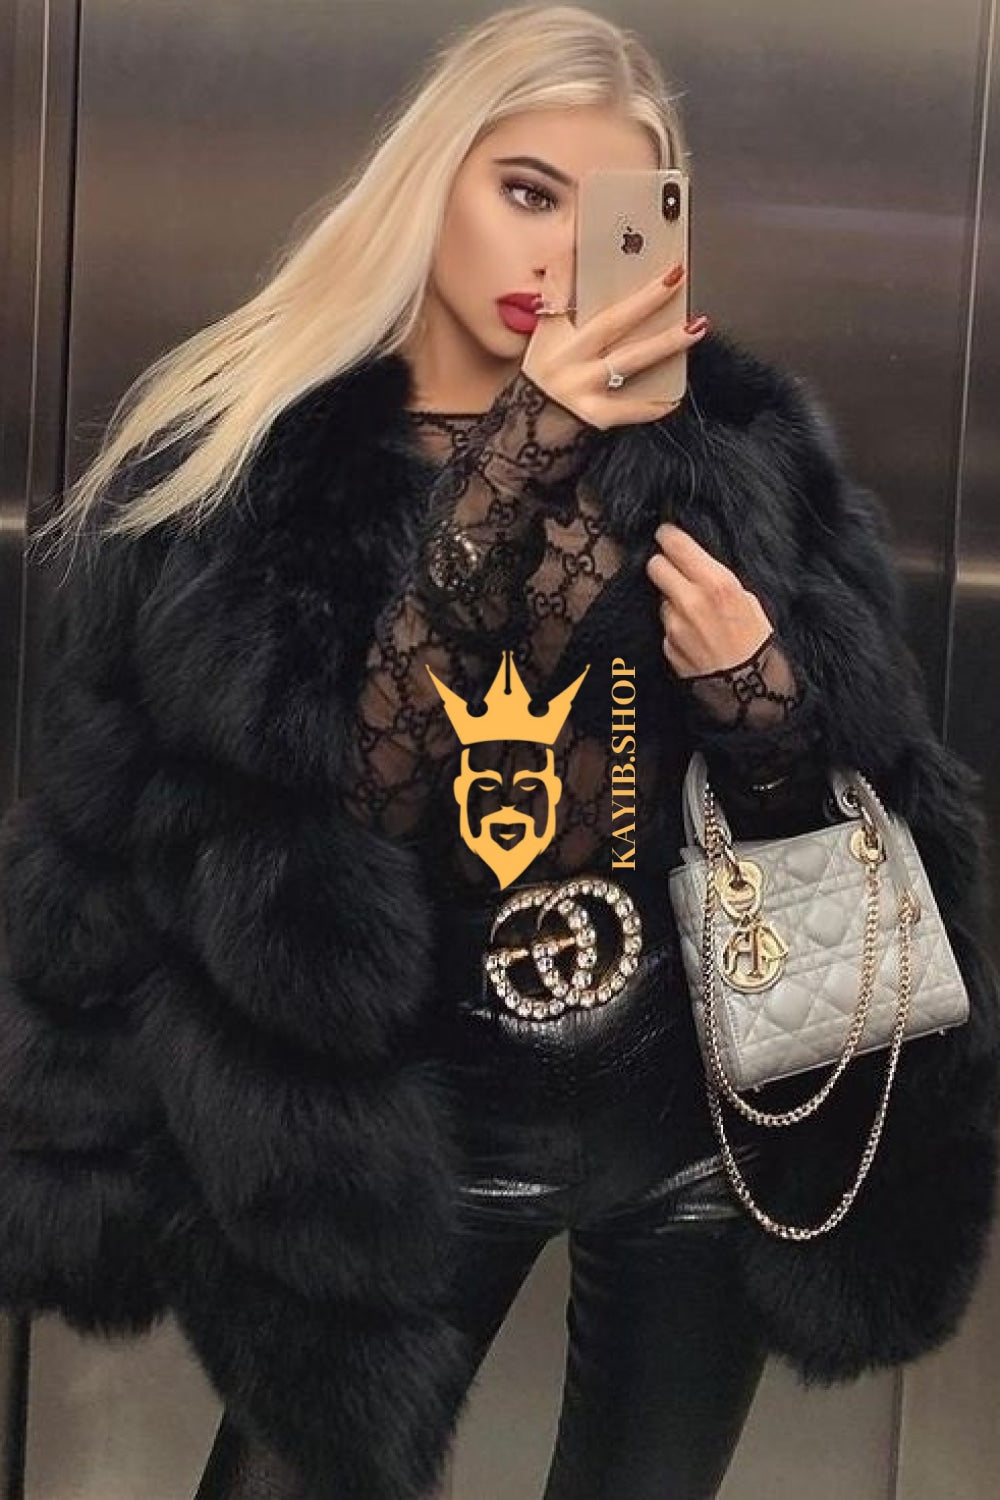 Do you like real or fake fur? #realfur #furcoat #furry #luxury #unboxing  #coat #shorts #viral #lv 